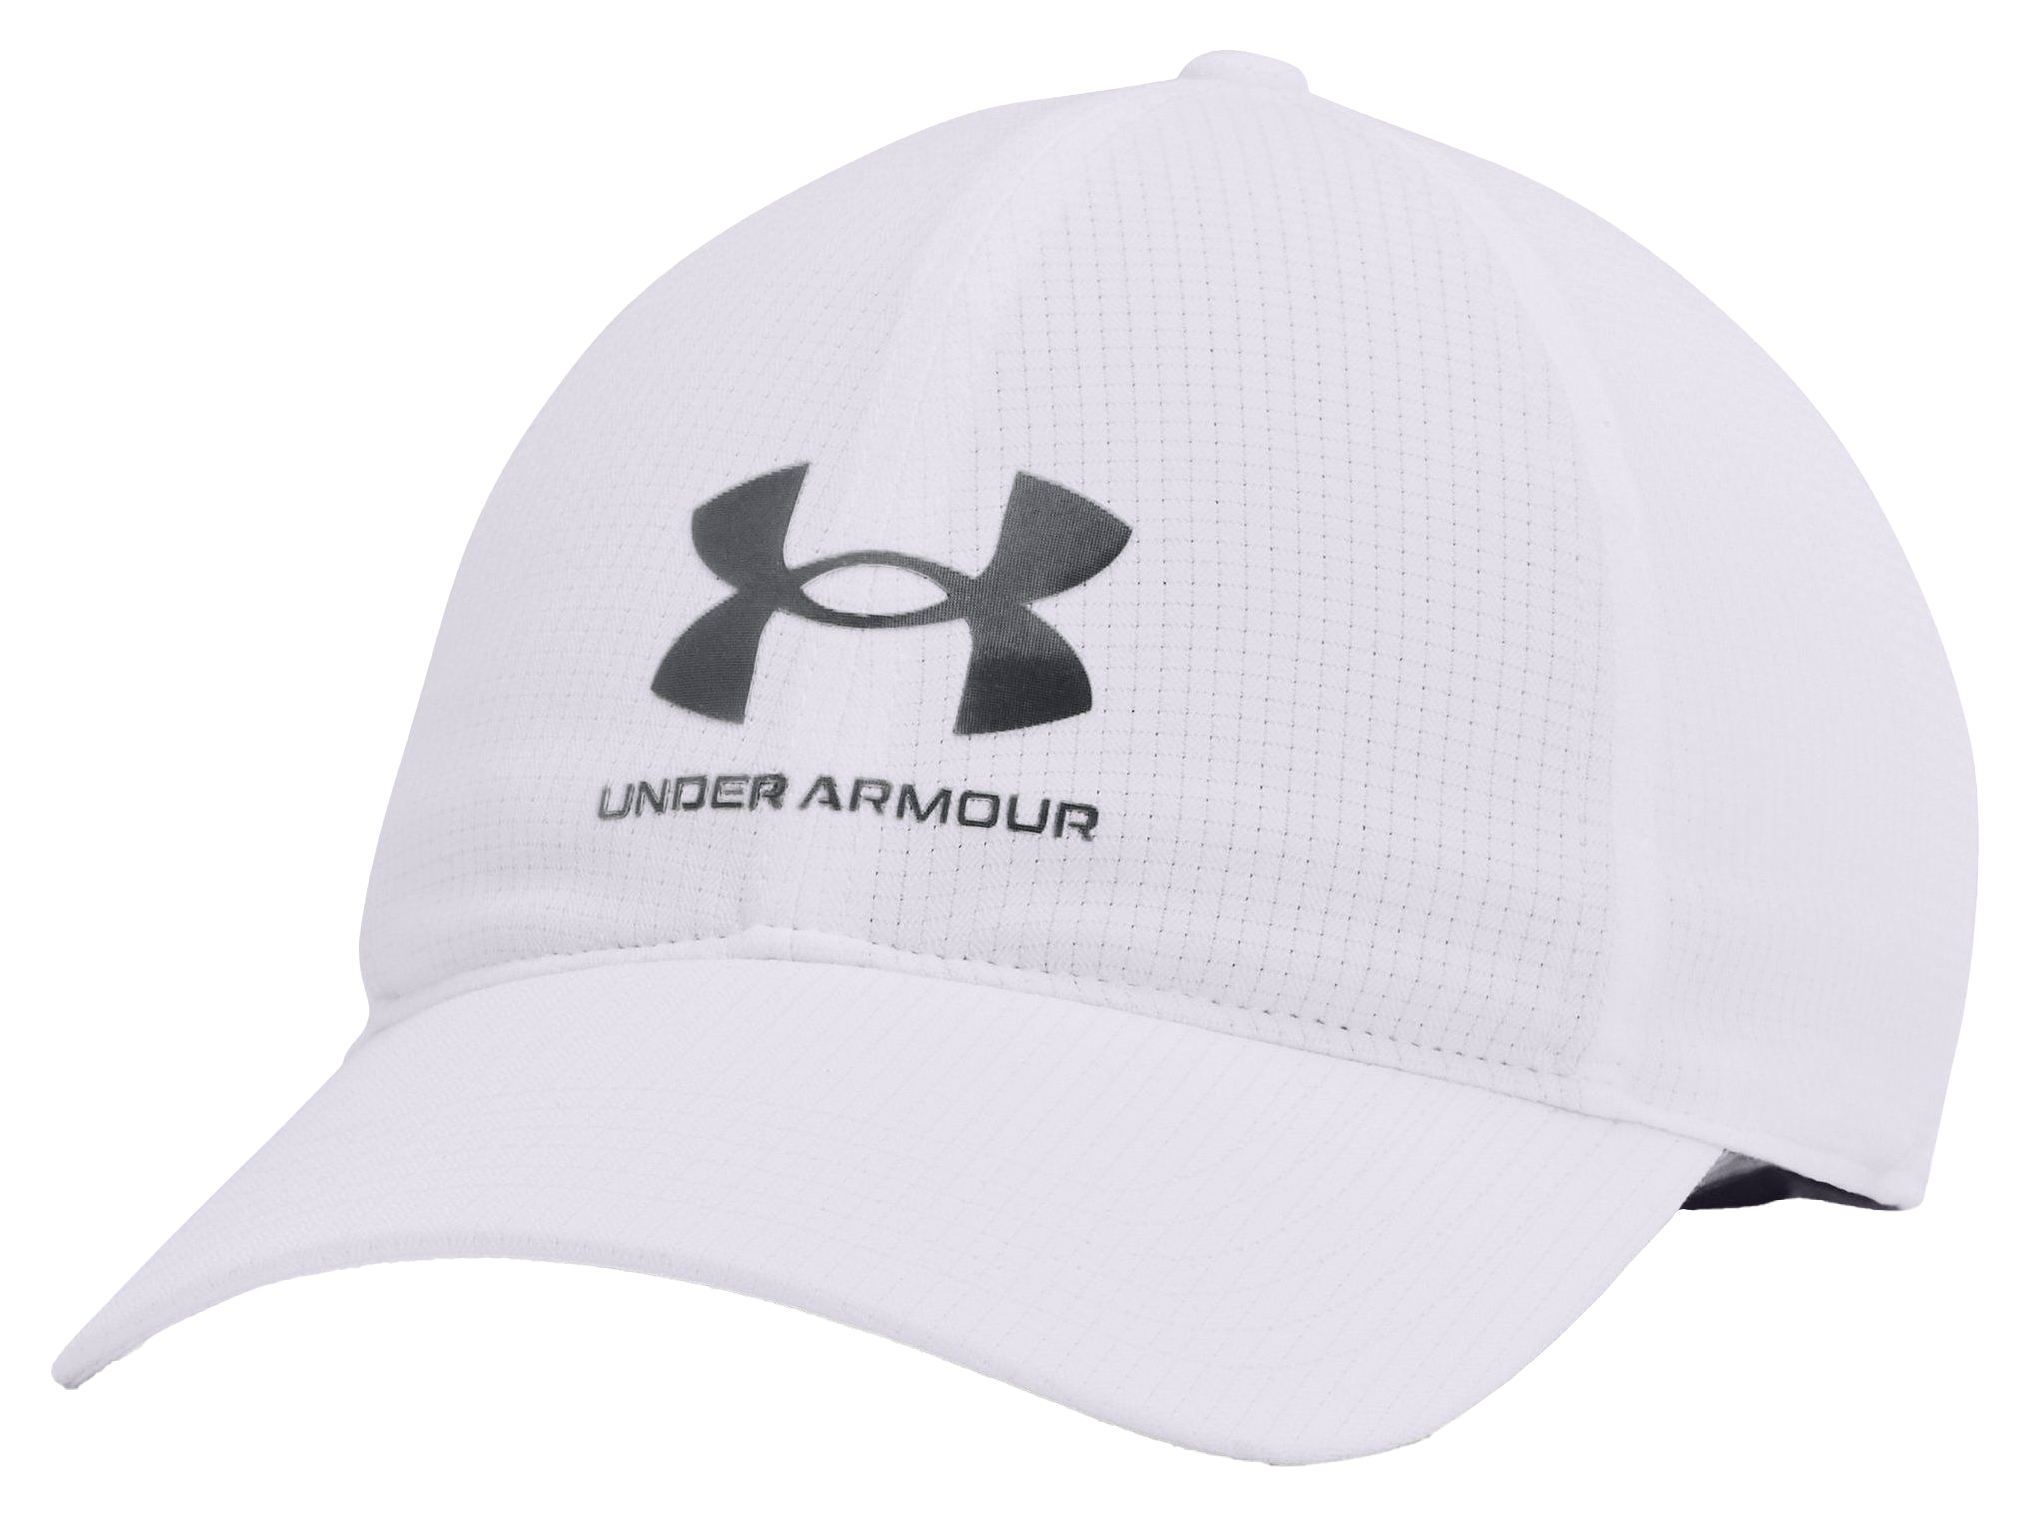 Stay Cool and Protected with Under Armour Womens ArmourVent Fishing Capri